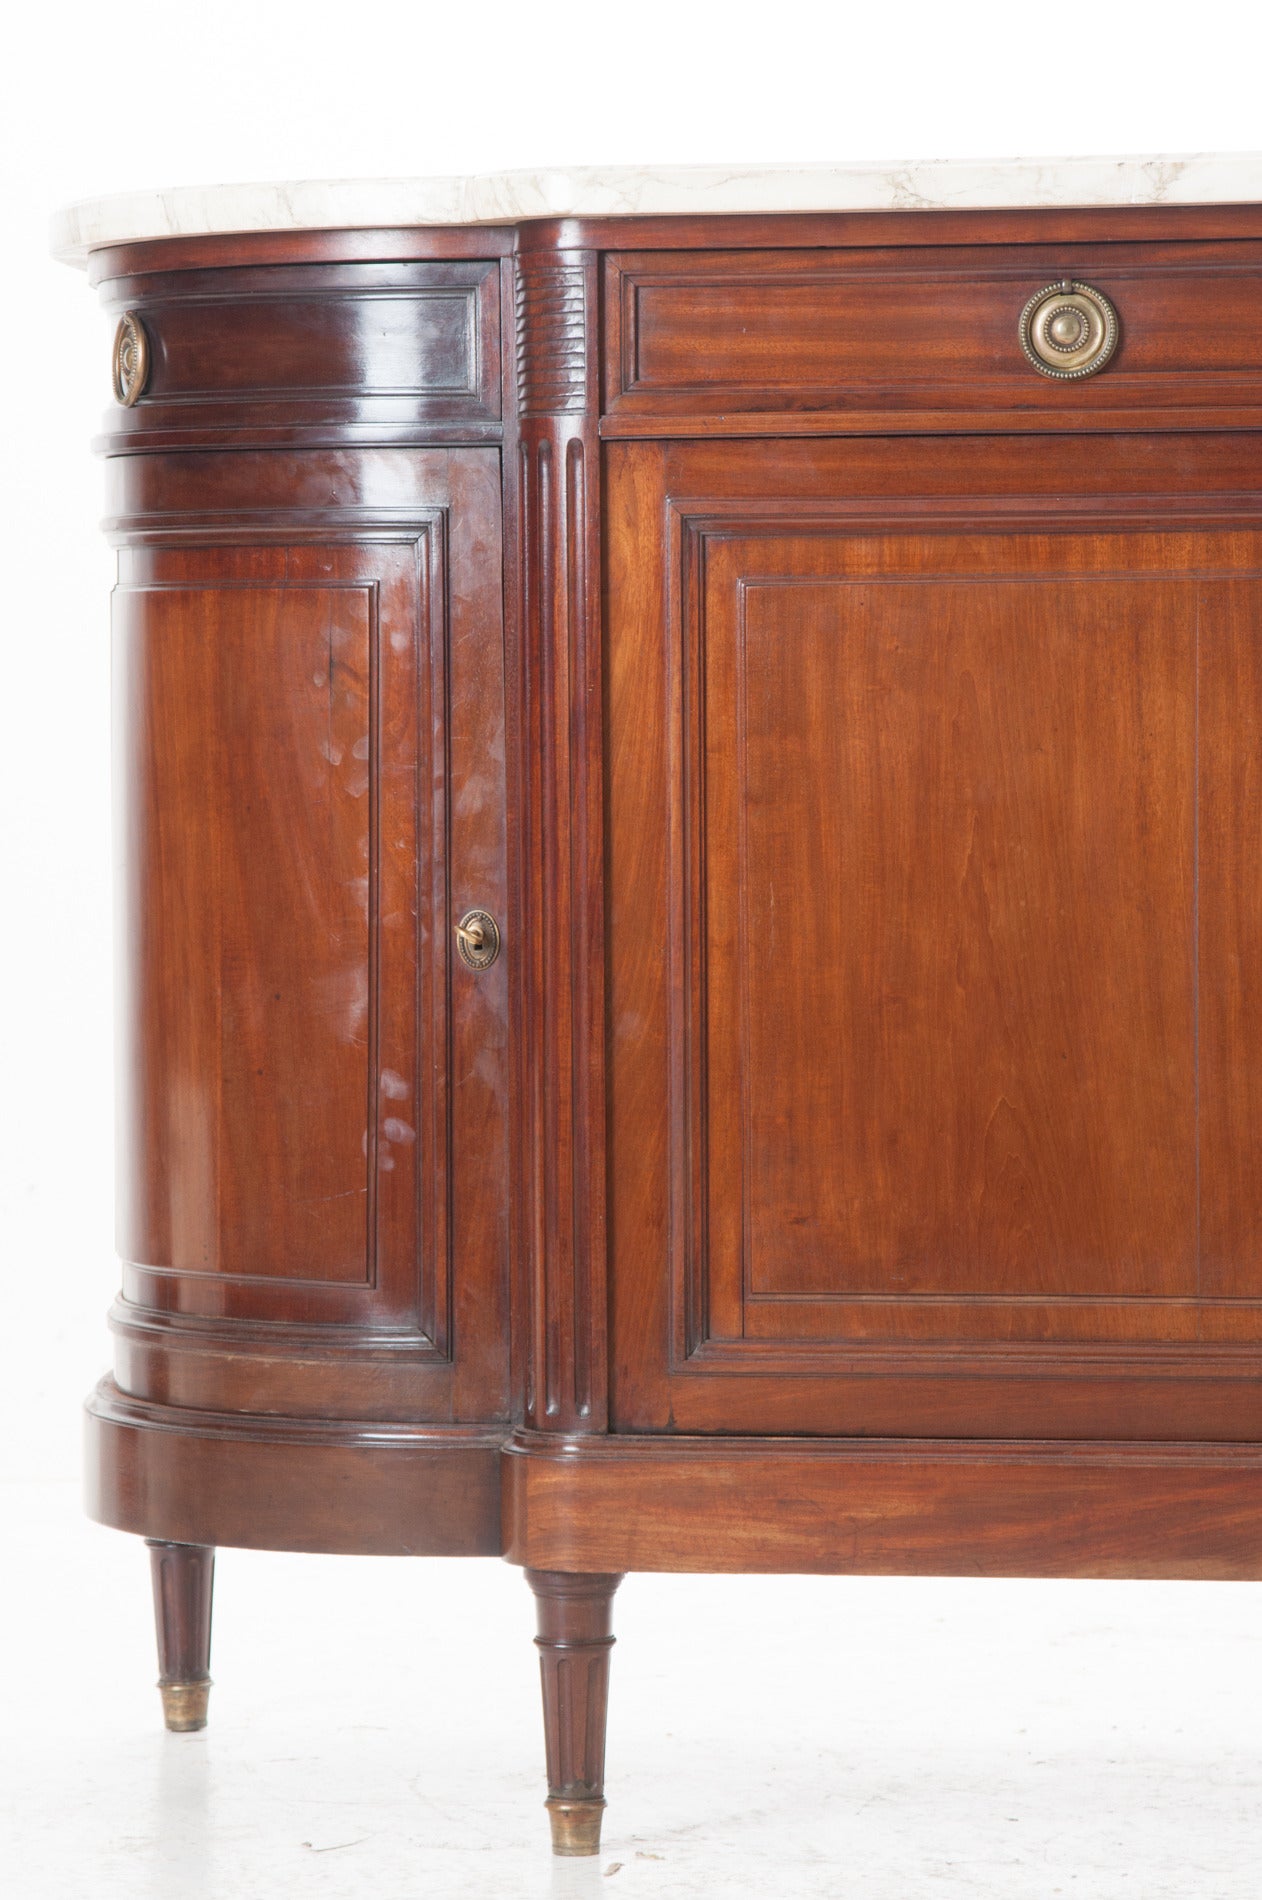 A classic Louis XVI style mahogany demilune buffet / enfilade with its original white marble top. Four spacious drawers and four doors allow for  lots of storage. The pronounced and fluted corners are perfect on  this detailed yet simple buffet. It